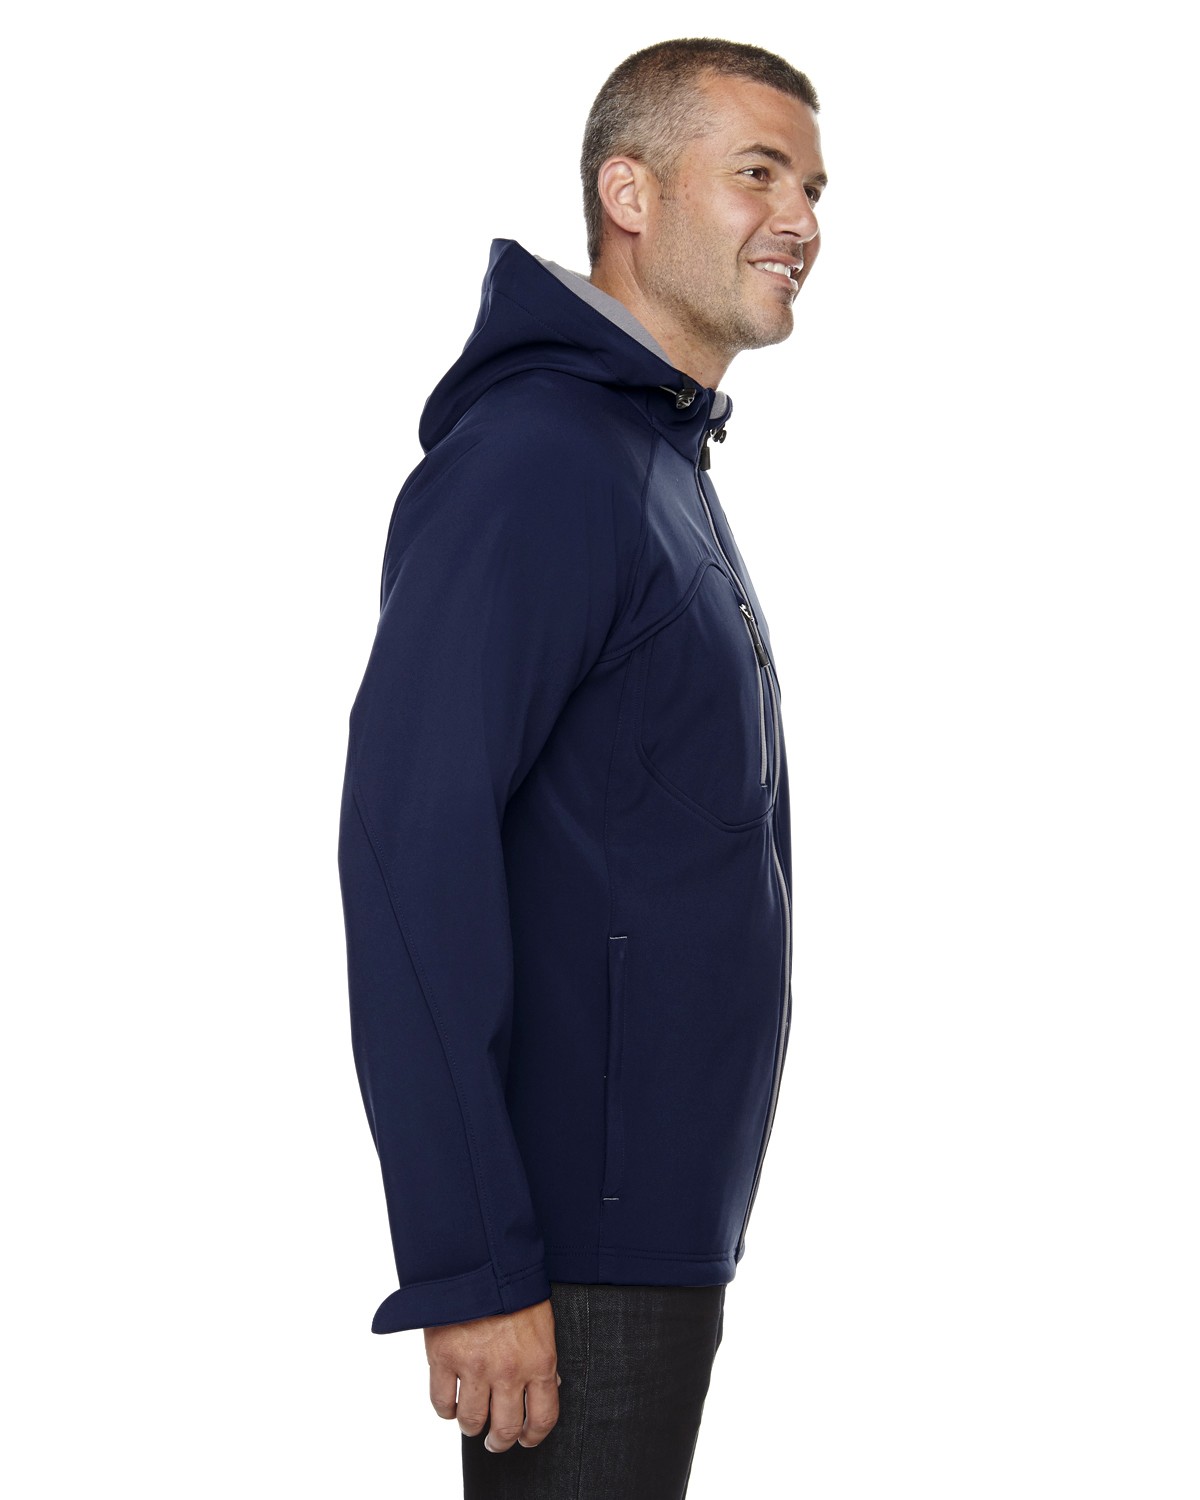 North End 88166 Men's Prospect Two-Layer Fleece Bonded Soft Shell ...